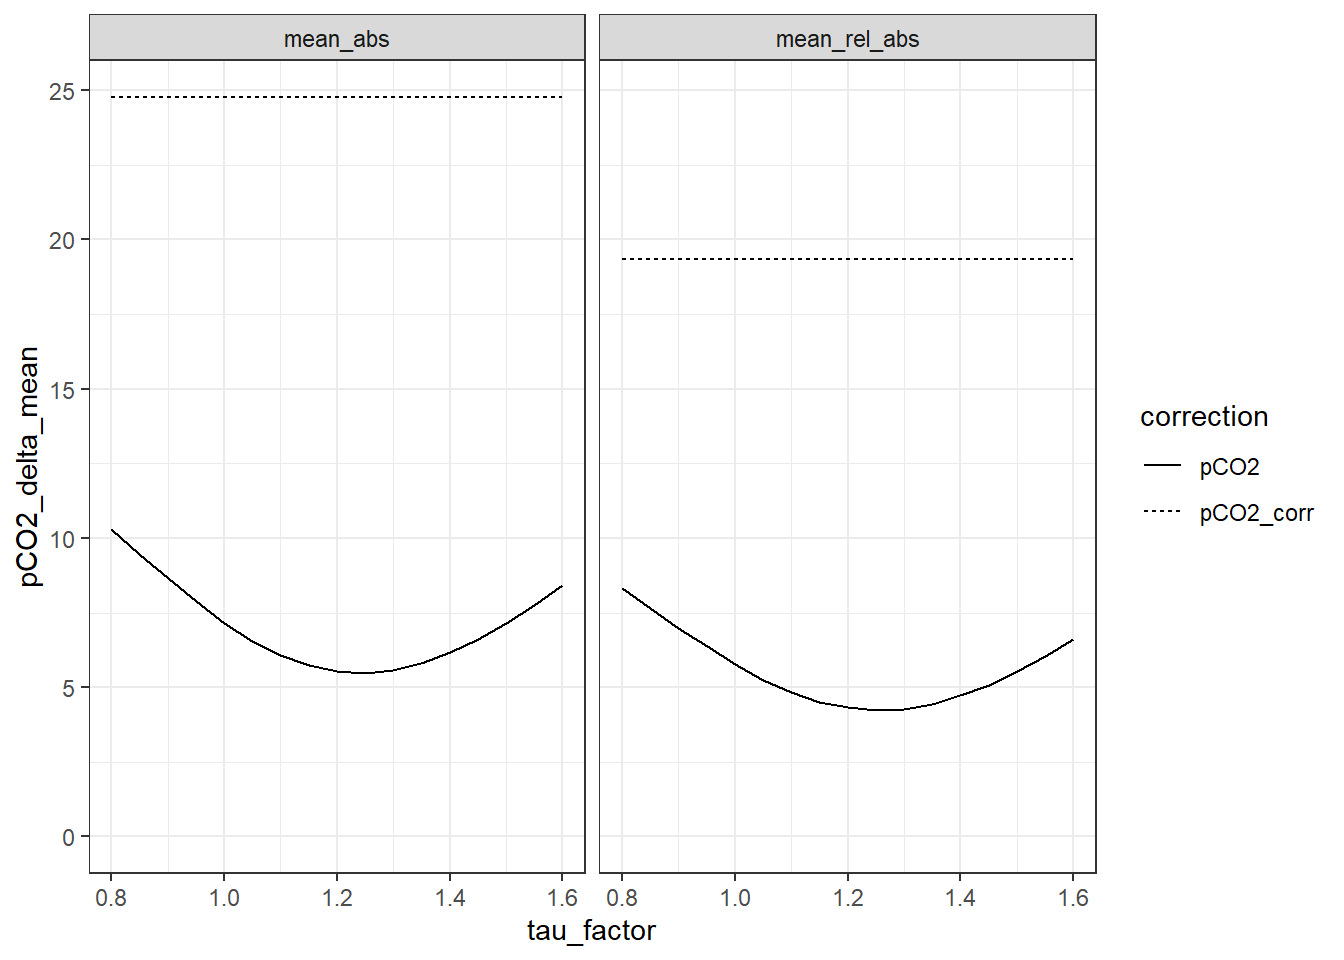 Mean offset between up- and downcast for all profiles up to 20m water depth. The lines between discrete tau factors result from the same analysis performed with high resolution of the tau factor. Left Panel: Mean absolute offset (µatm). Right panel: Mean relative offset (% of absolute value).